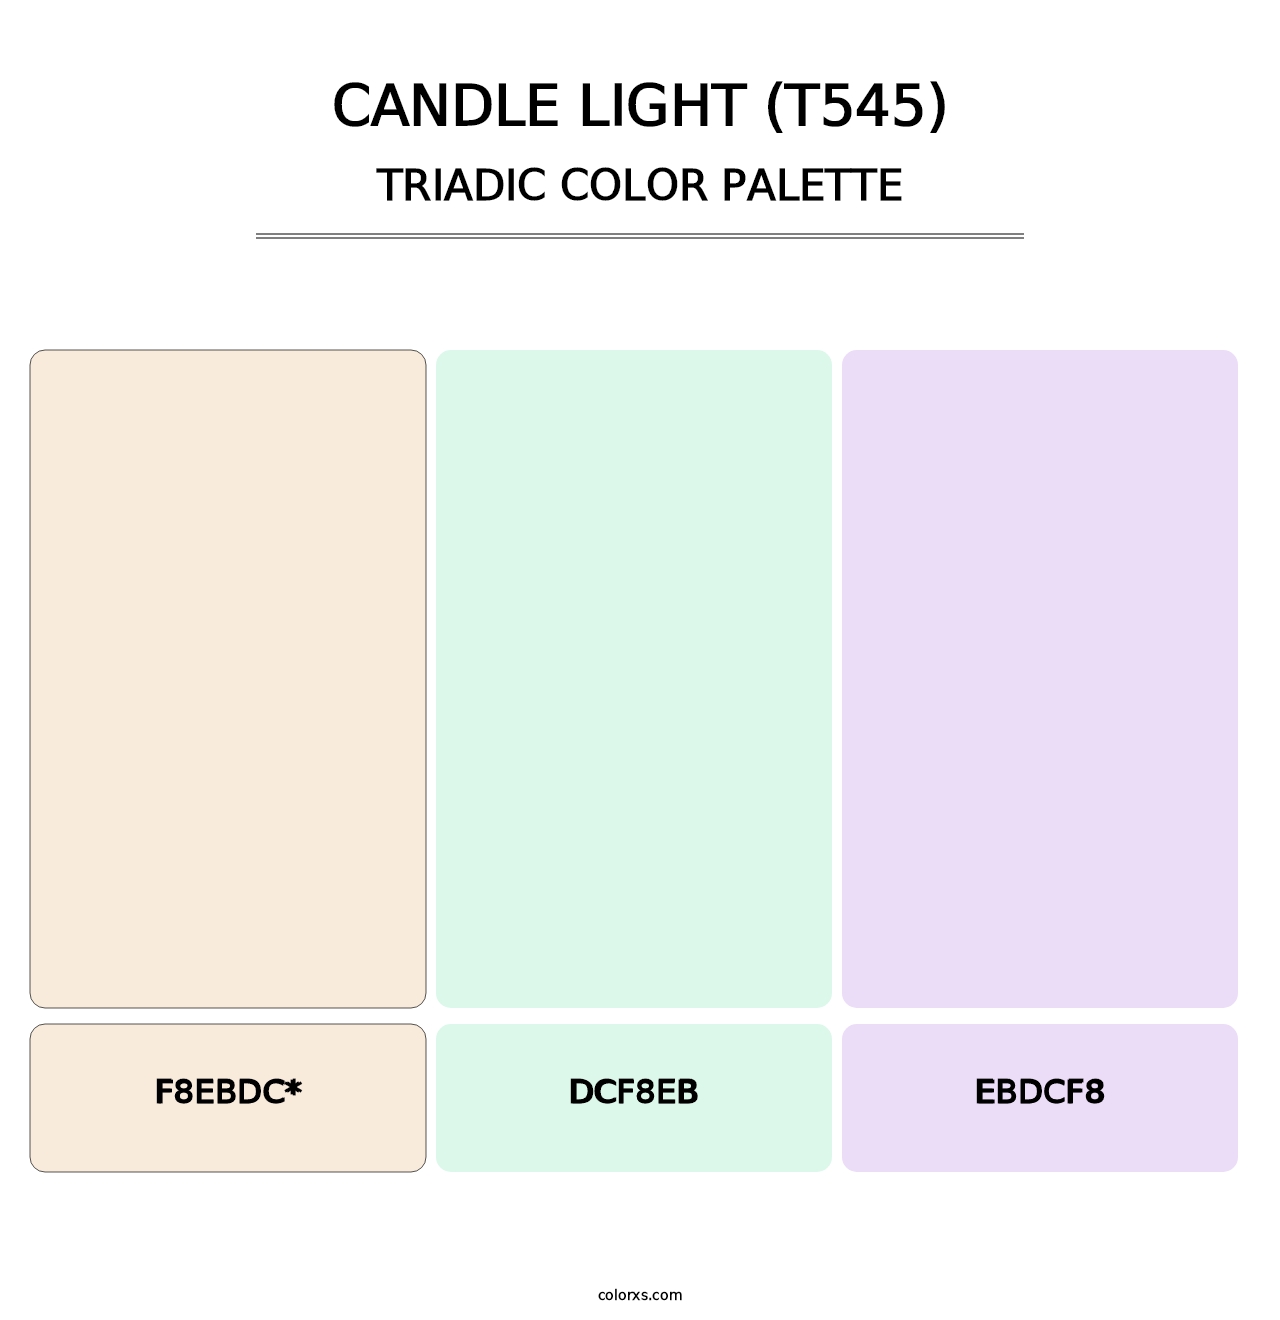 Candle Light (T545) - Triadic Color Palette